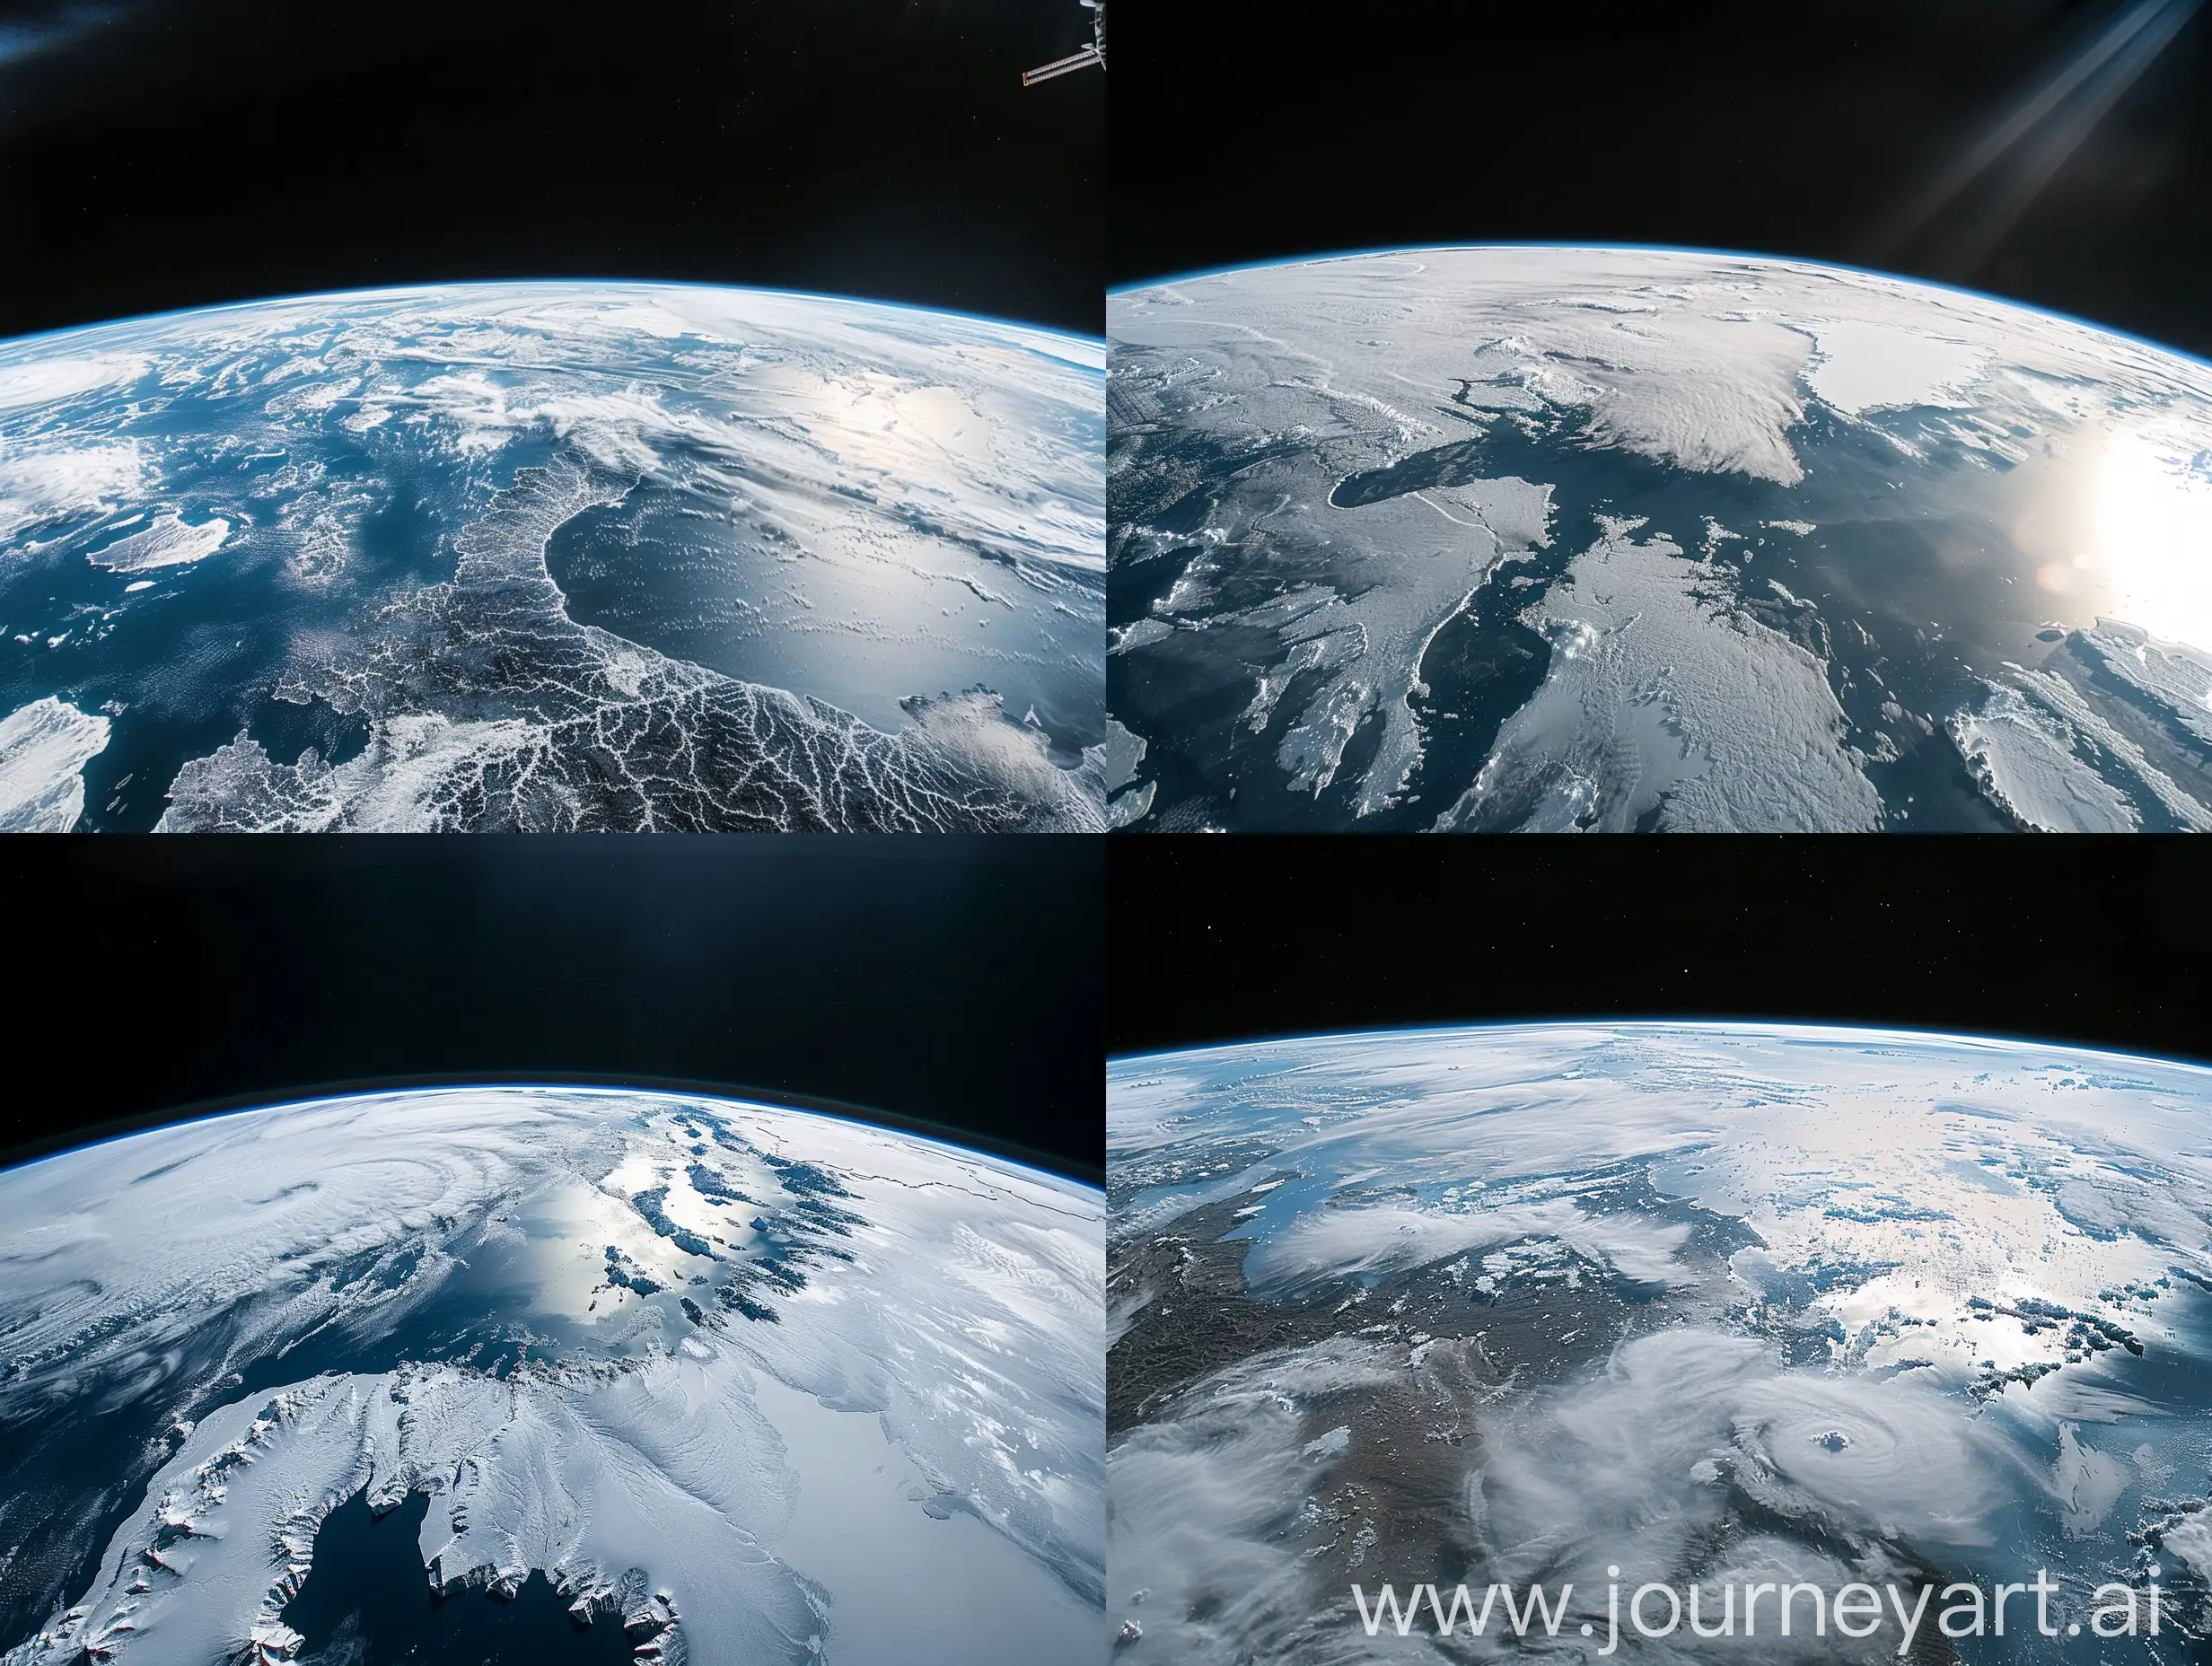 A breathtaking view of Earth from space in 2032, showcasing the curvature of the planet against the black backdrop of space, polar ice caps glistening in the sunlight, a delicate layer of atmosphere hugging the surface, evoking feelings of admiration and insignificance, Photography, satellite imagery captured by a high-resolution camera, 